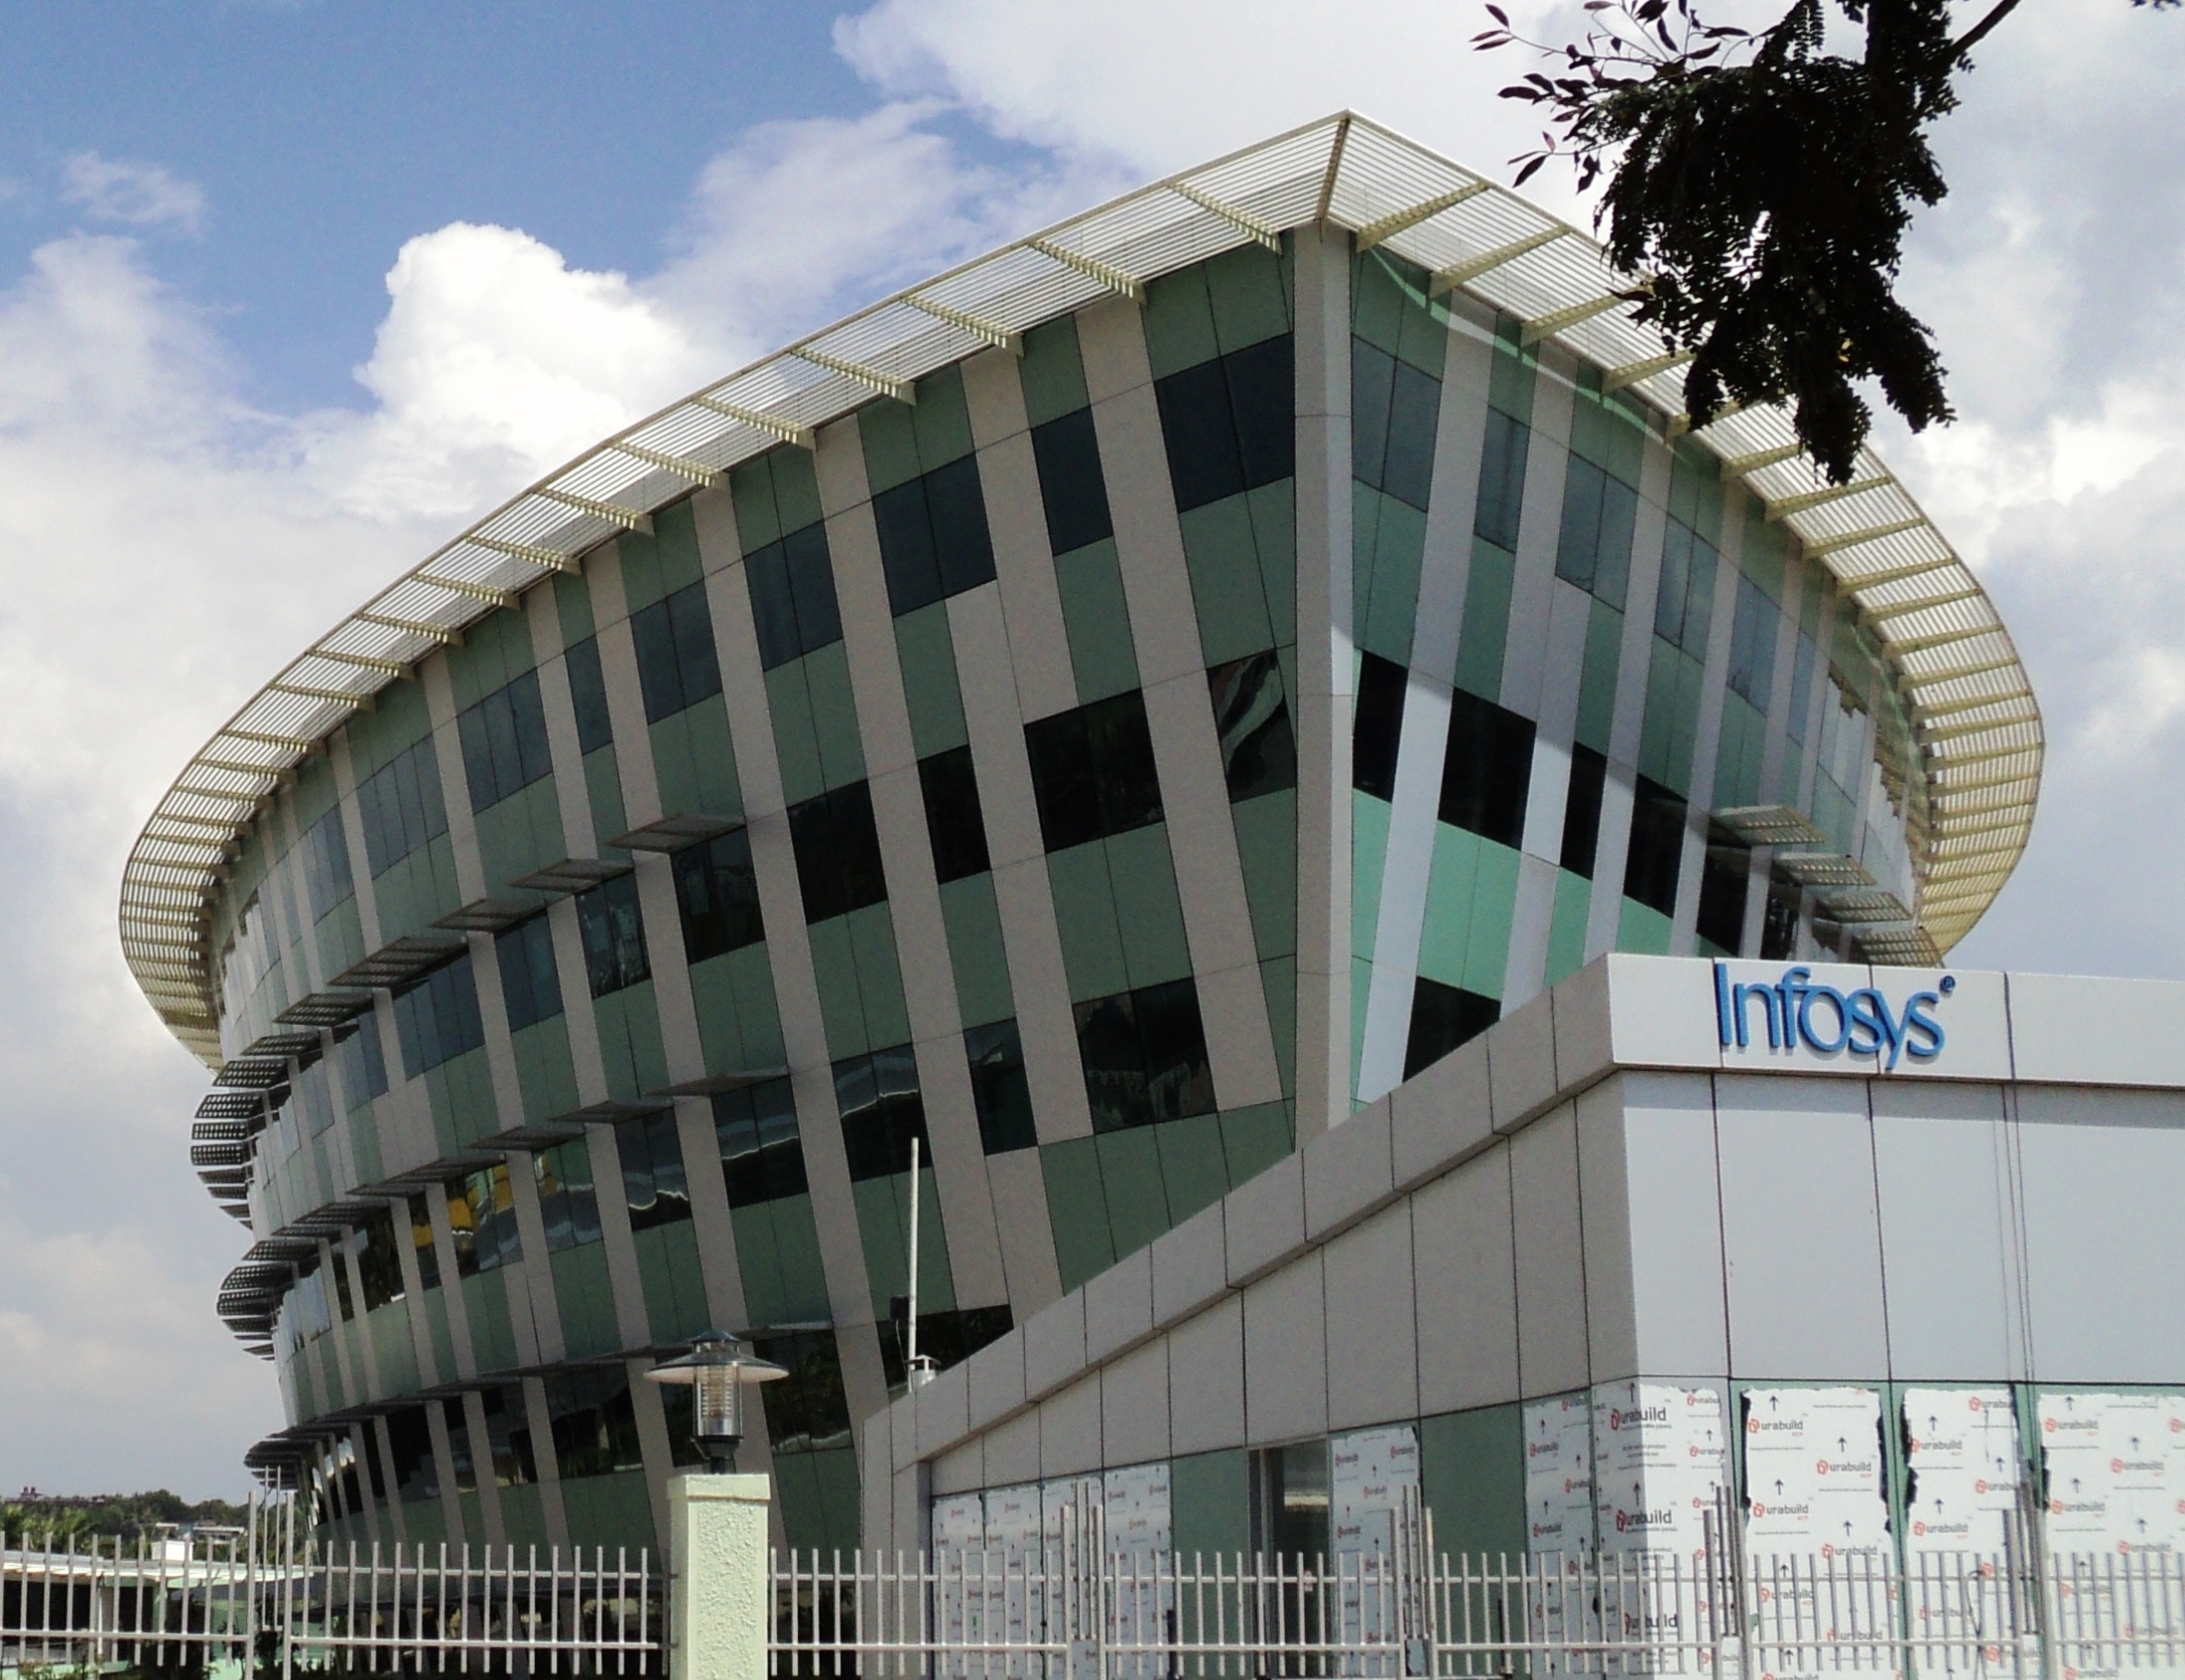 Infosys a Brand for Digital Services in US: Report - Odisha News Insight